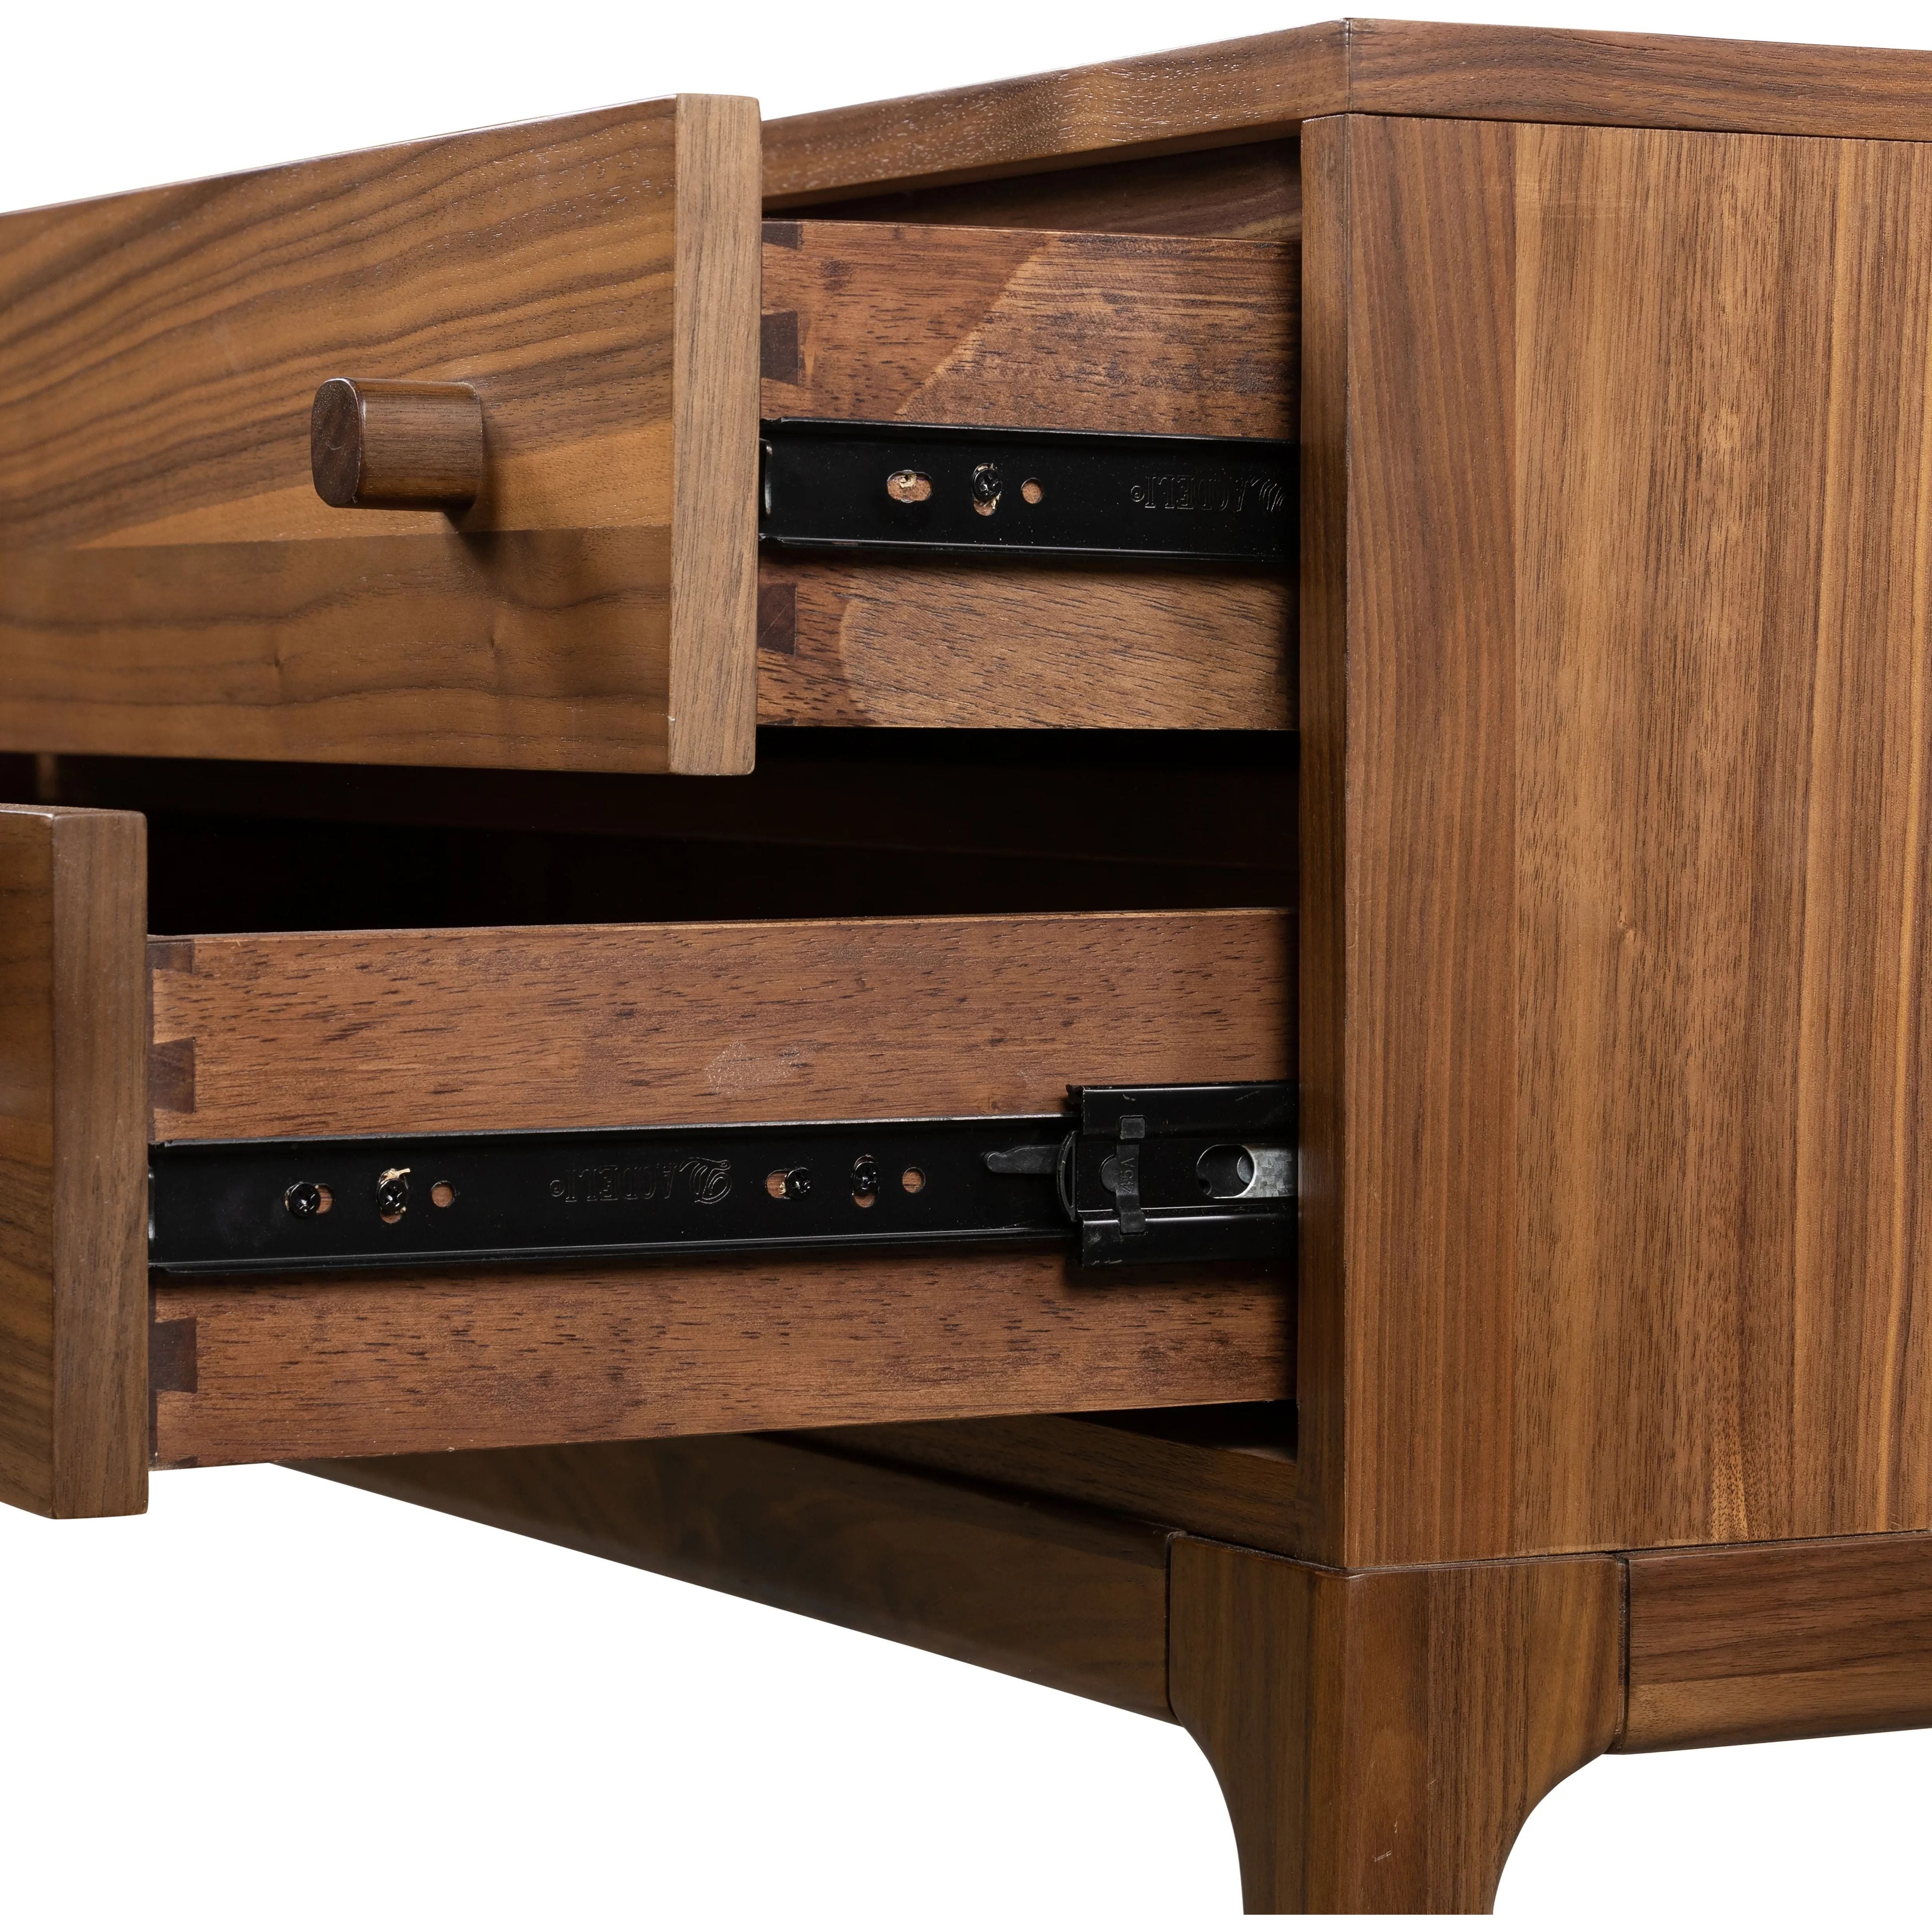 Inspired by campaign-style furniture of the 1800s â€” packable pieces first designed for traveling military use â€” a simply shaped nightstand of natural walnut features a subtly inset top and rounded legs, finished with wooden hardware Amethyst Home provides interior design, new home construction design consulting, vintage area rugs, and lighting in the Des Moines metro area.